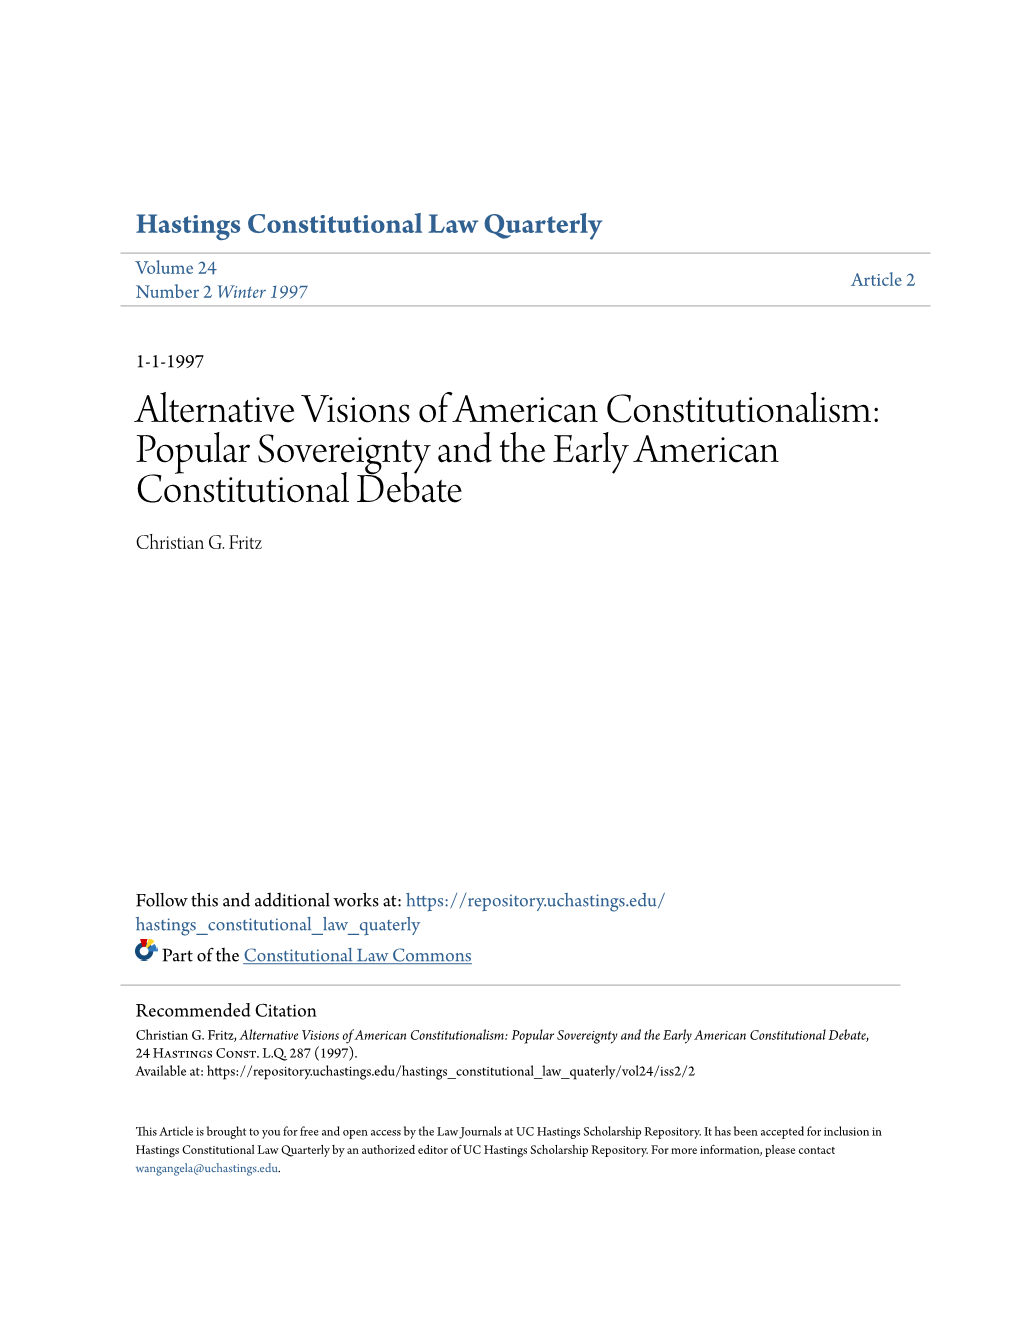 Popular Sovereignty and the Early American Constitutional Debate Christian G